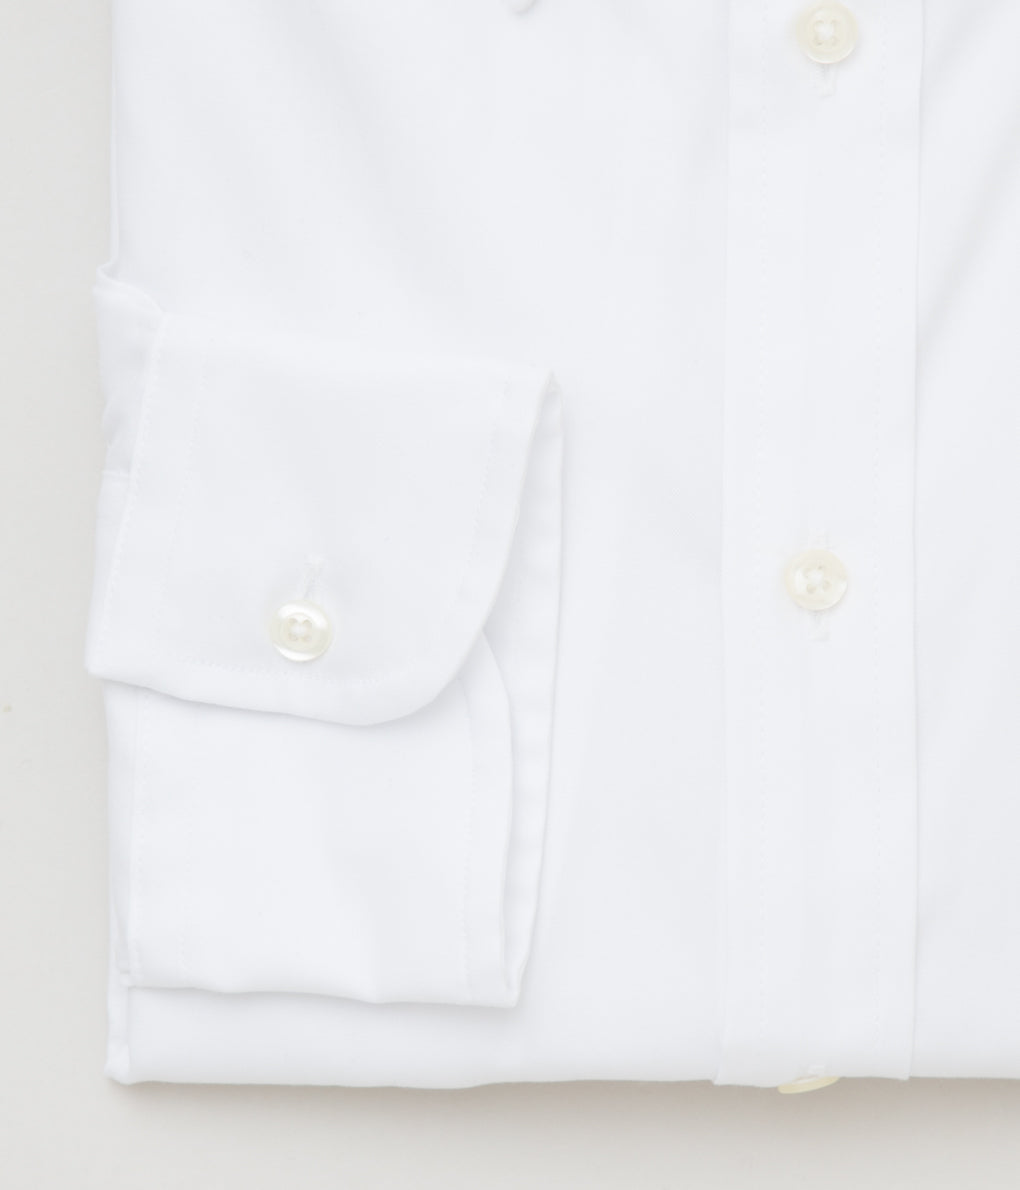 INDIVIDUALIZED SHIRTS "PINPOINT OXFORD (CLASSIC FIT BUTTON DOWN SHIRT)" (WHITE)